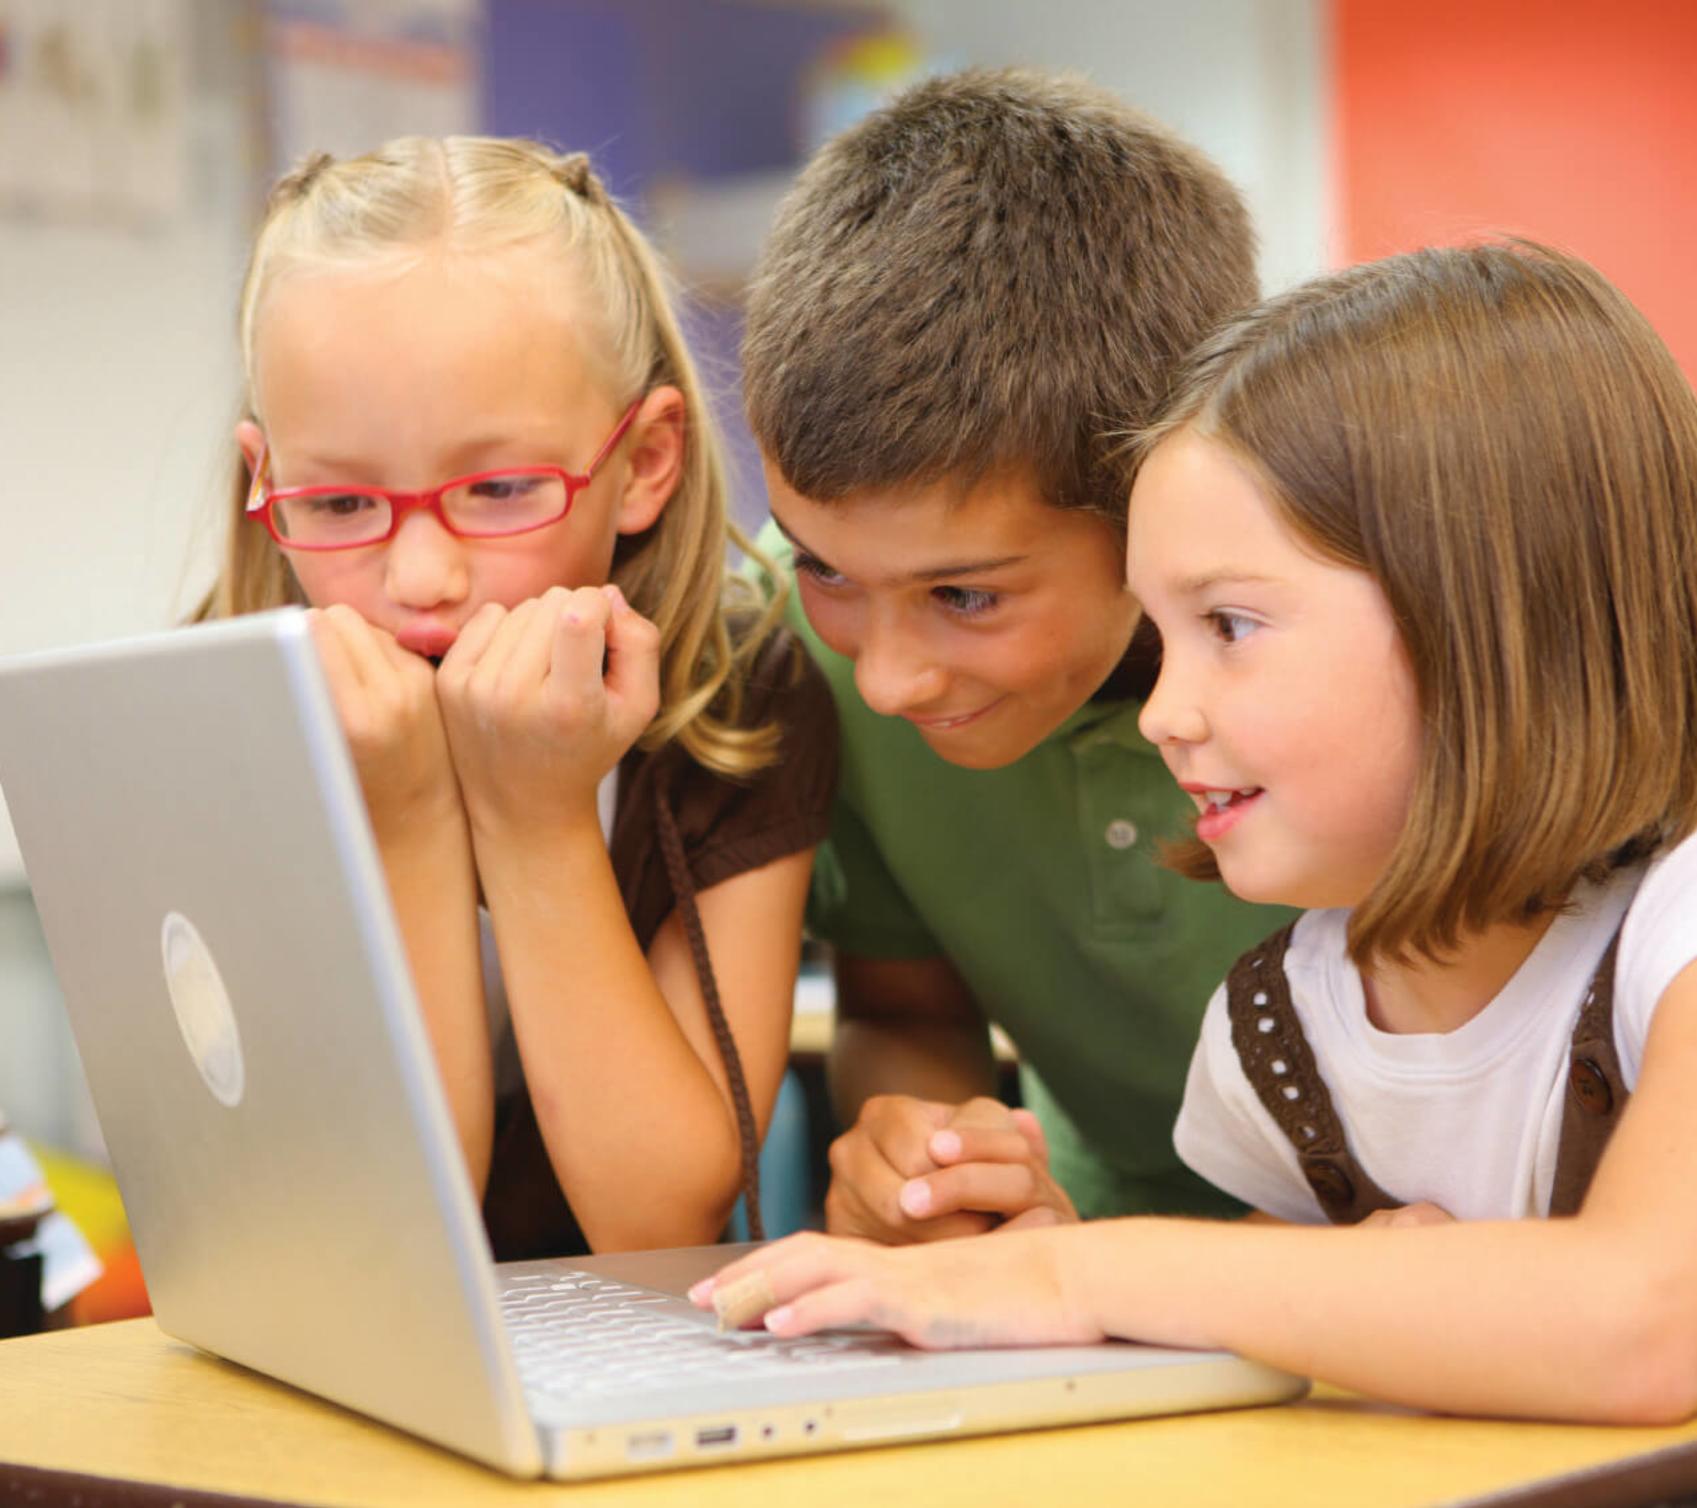 kids looking at a laptop